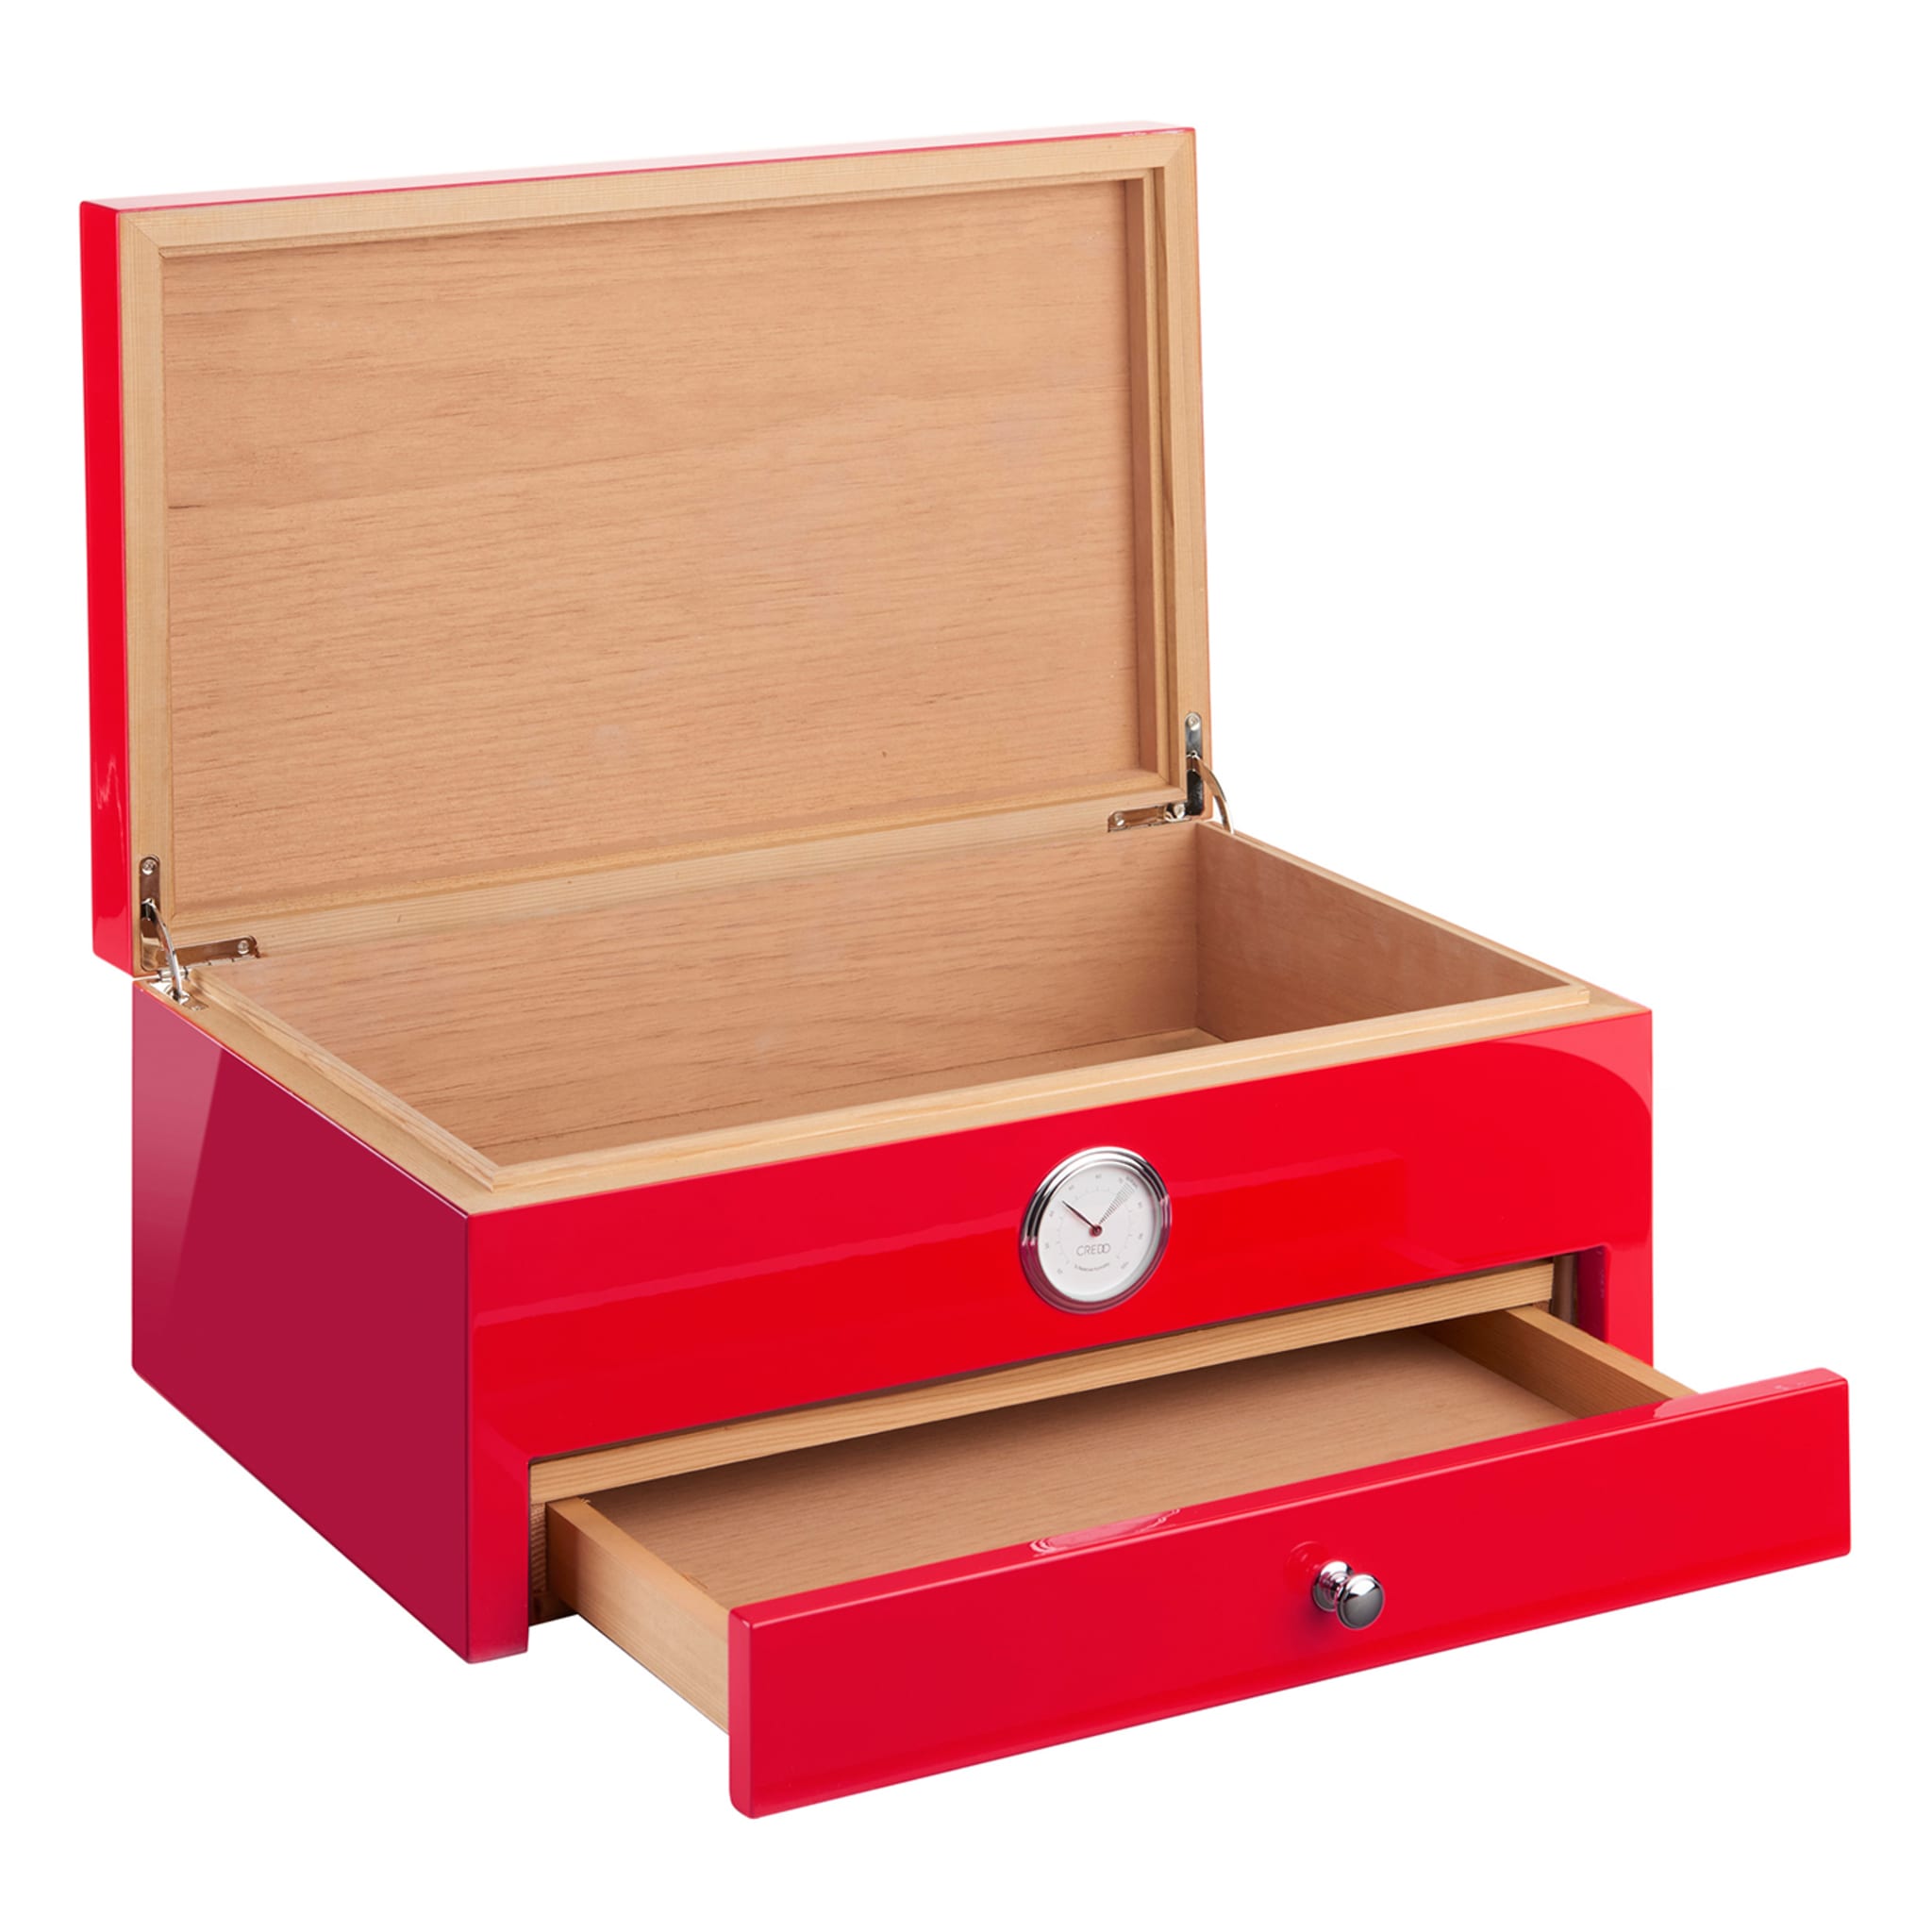 Full Color Red Humidor (Special Club Edition) - Alternative view 2